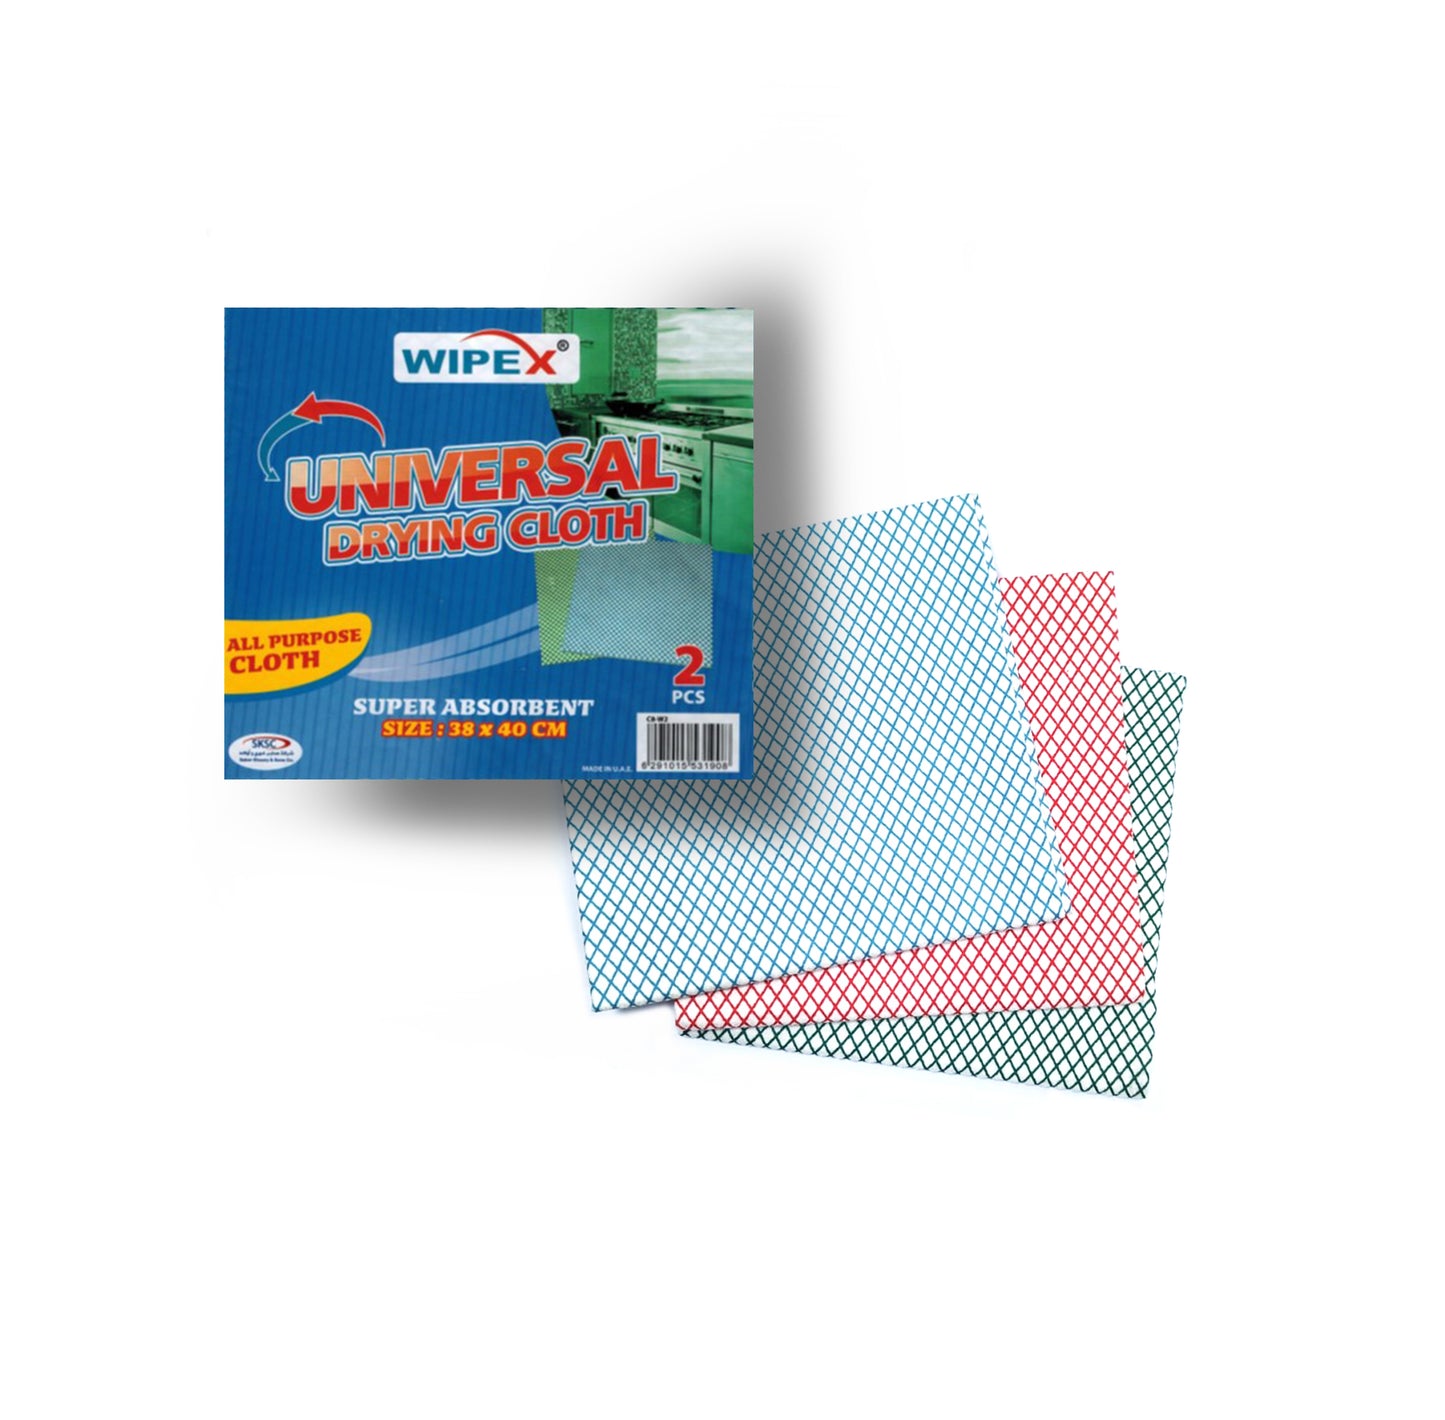 Universal Drying Cloth-Wipex